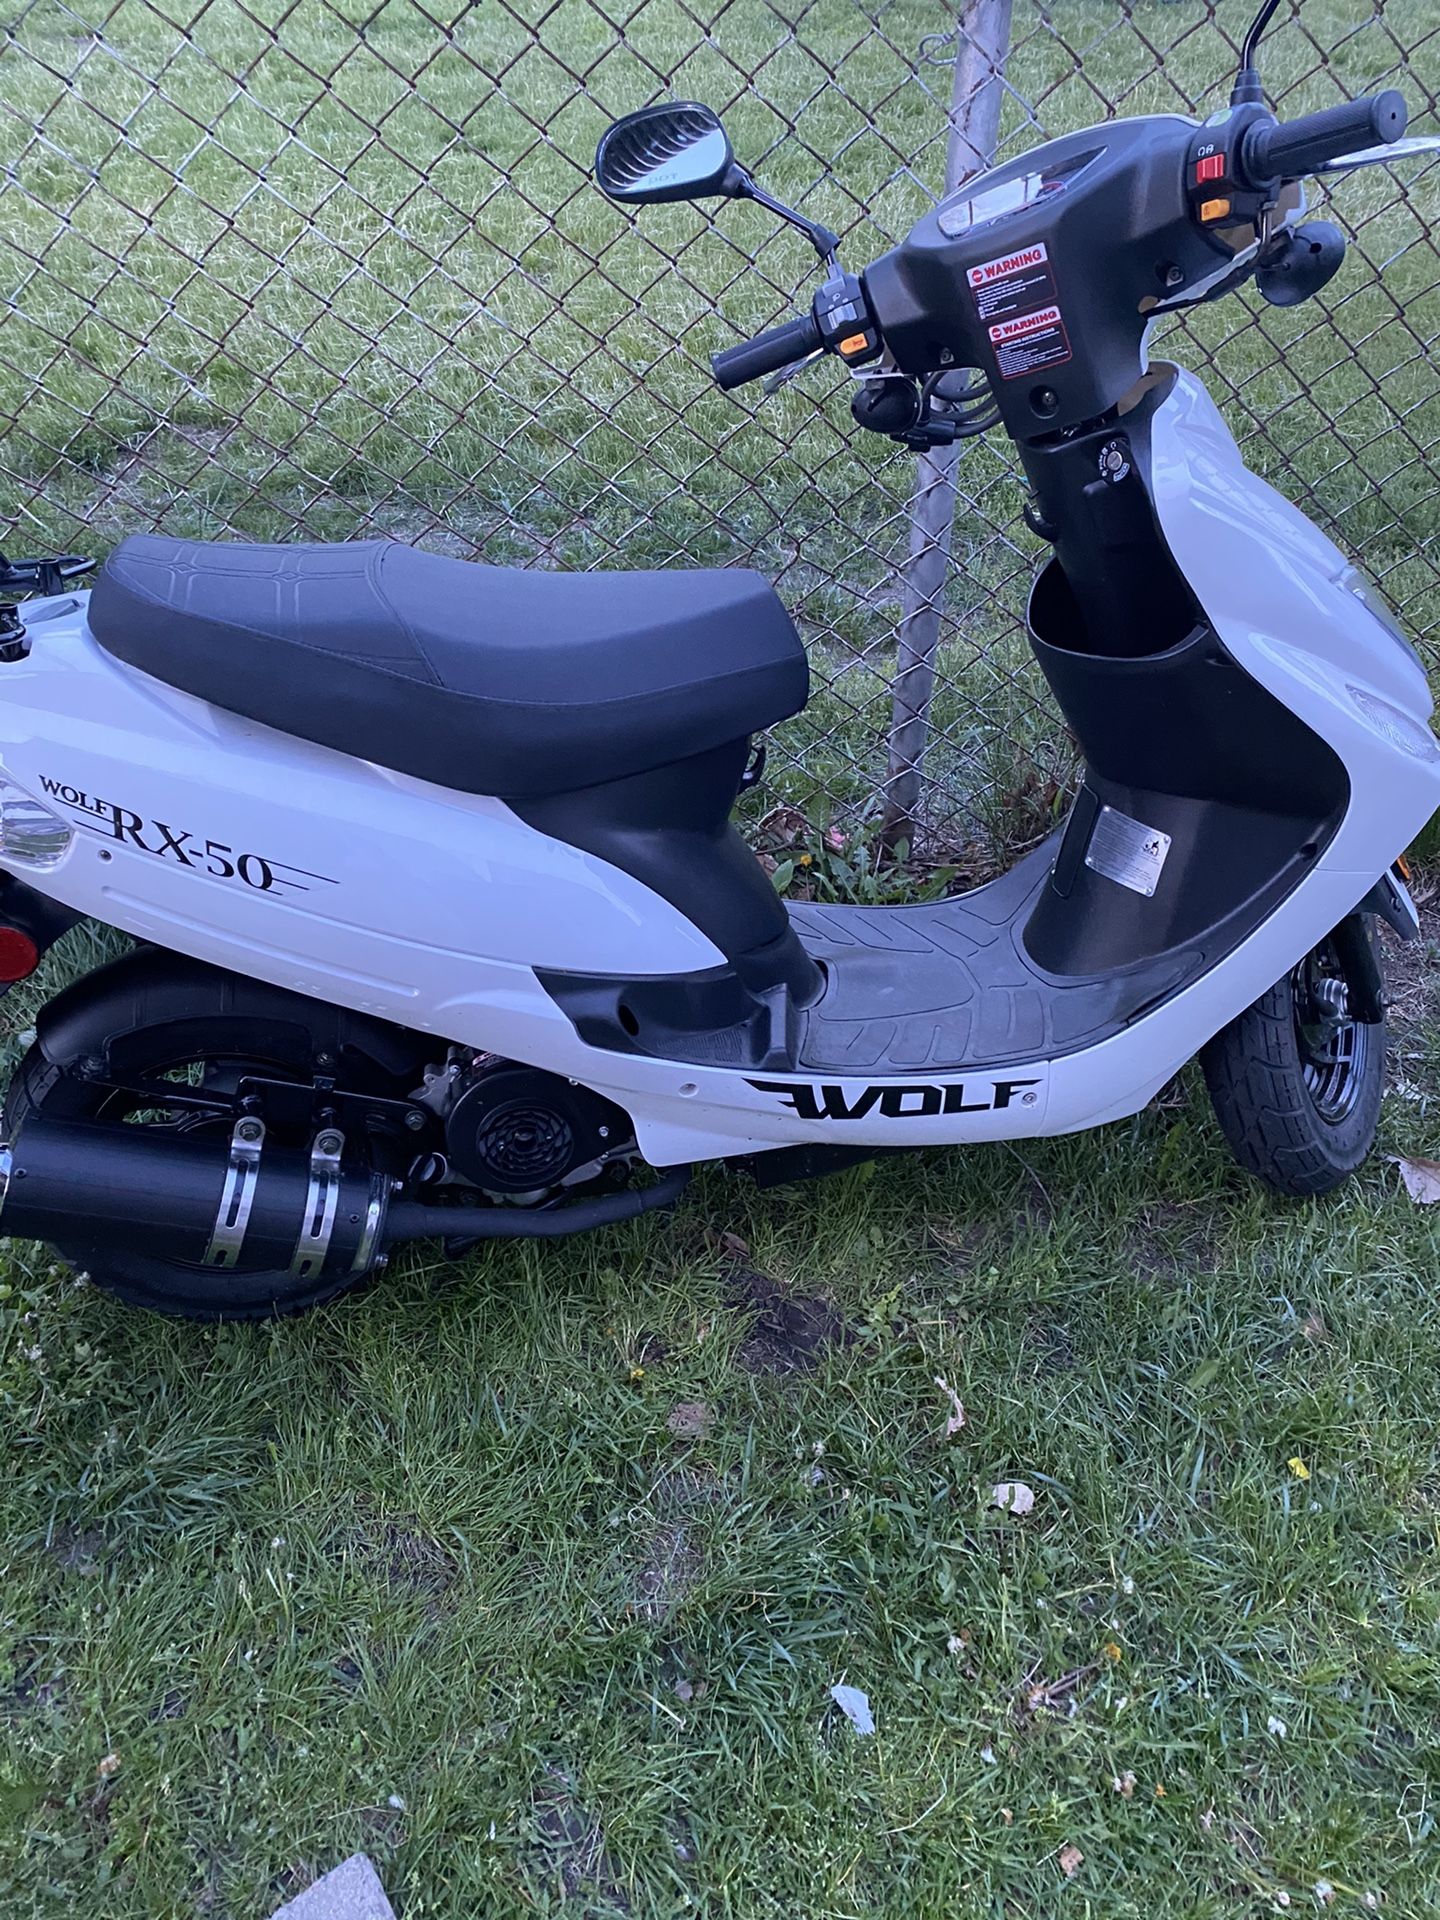 2021 wolf rx-50 moped brand new. no problems. cash only 